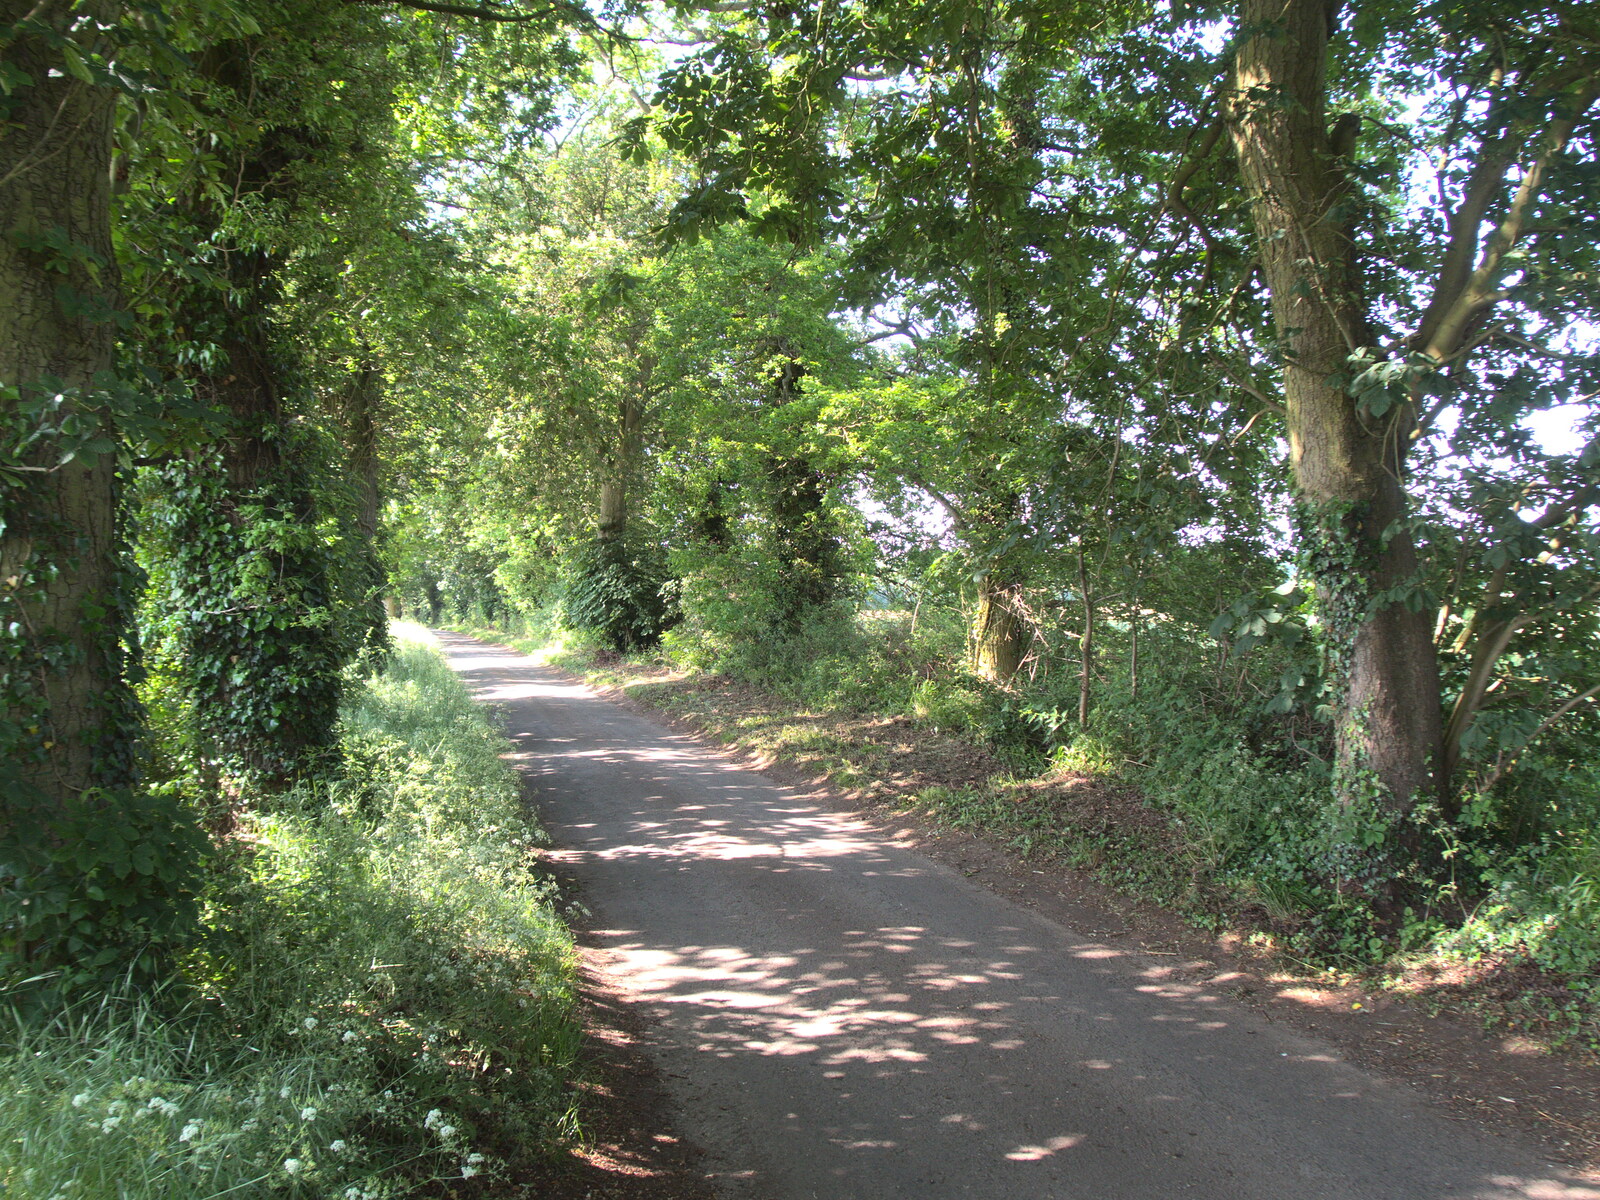 Thornham Road is in full summer leaf from A Visit to the Kittens, Scarning, Norfolk - 13th June 2021